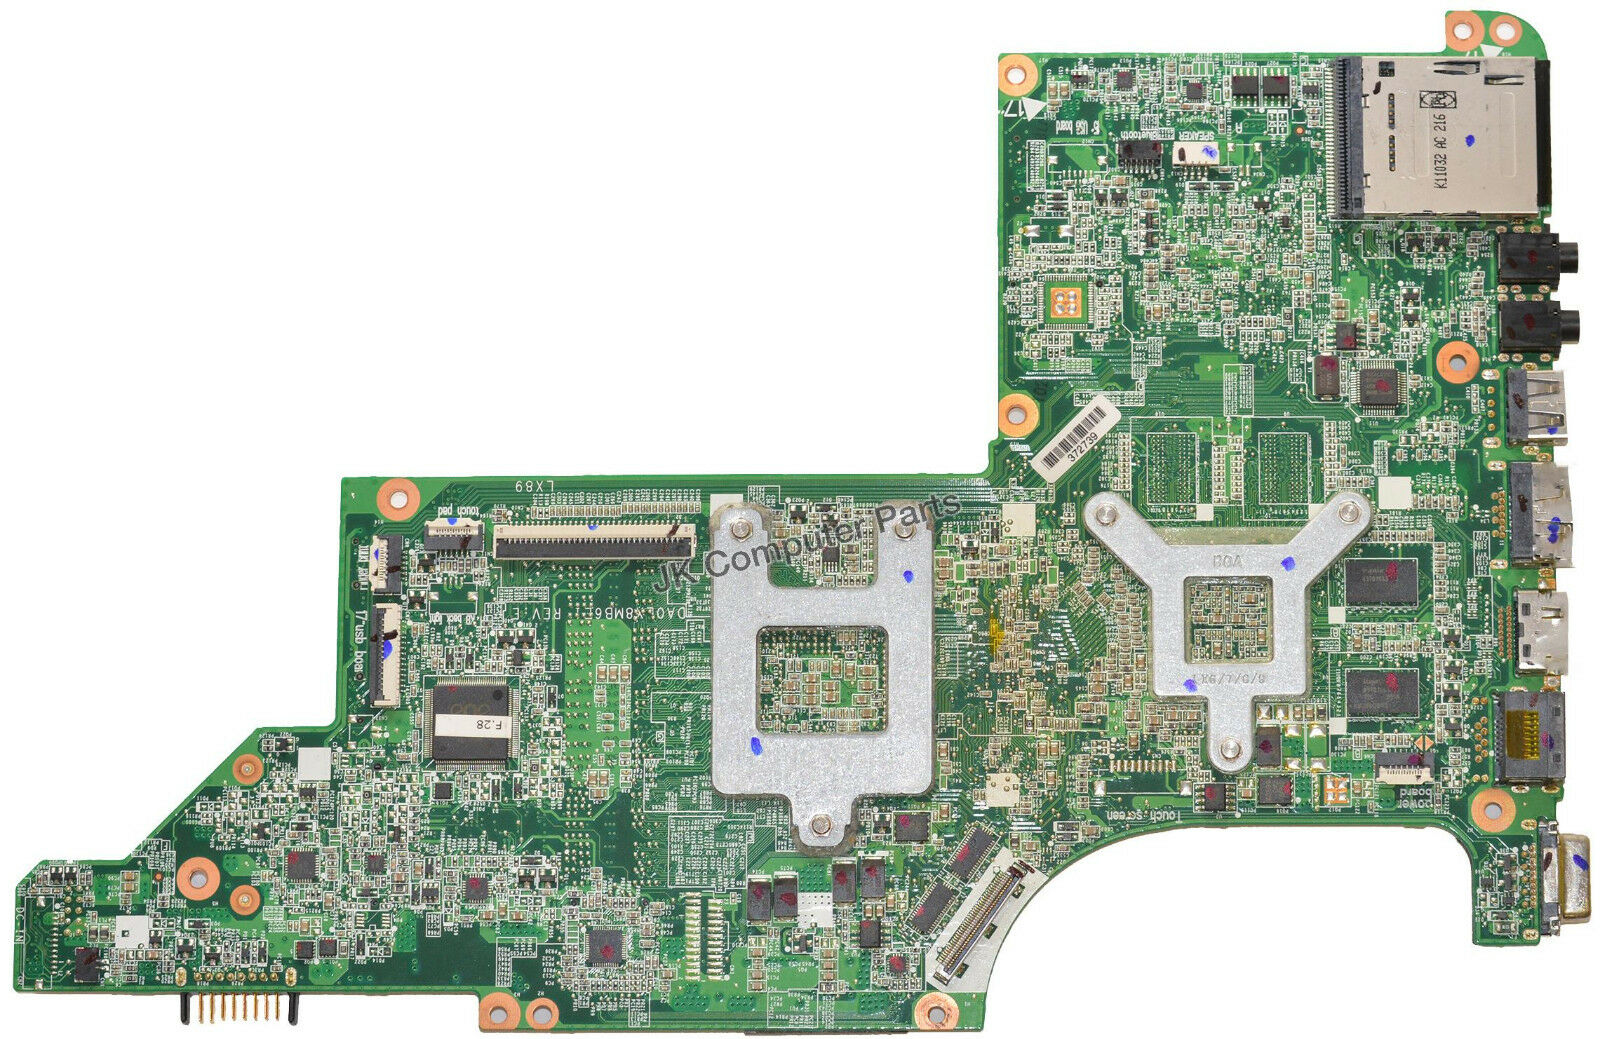 HP DV7-4267CL DV7-4270US DV7-4273US AMD Laptop Motherboard s1 630833-001 Brand: HP Compatible CPU Brand: AM